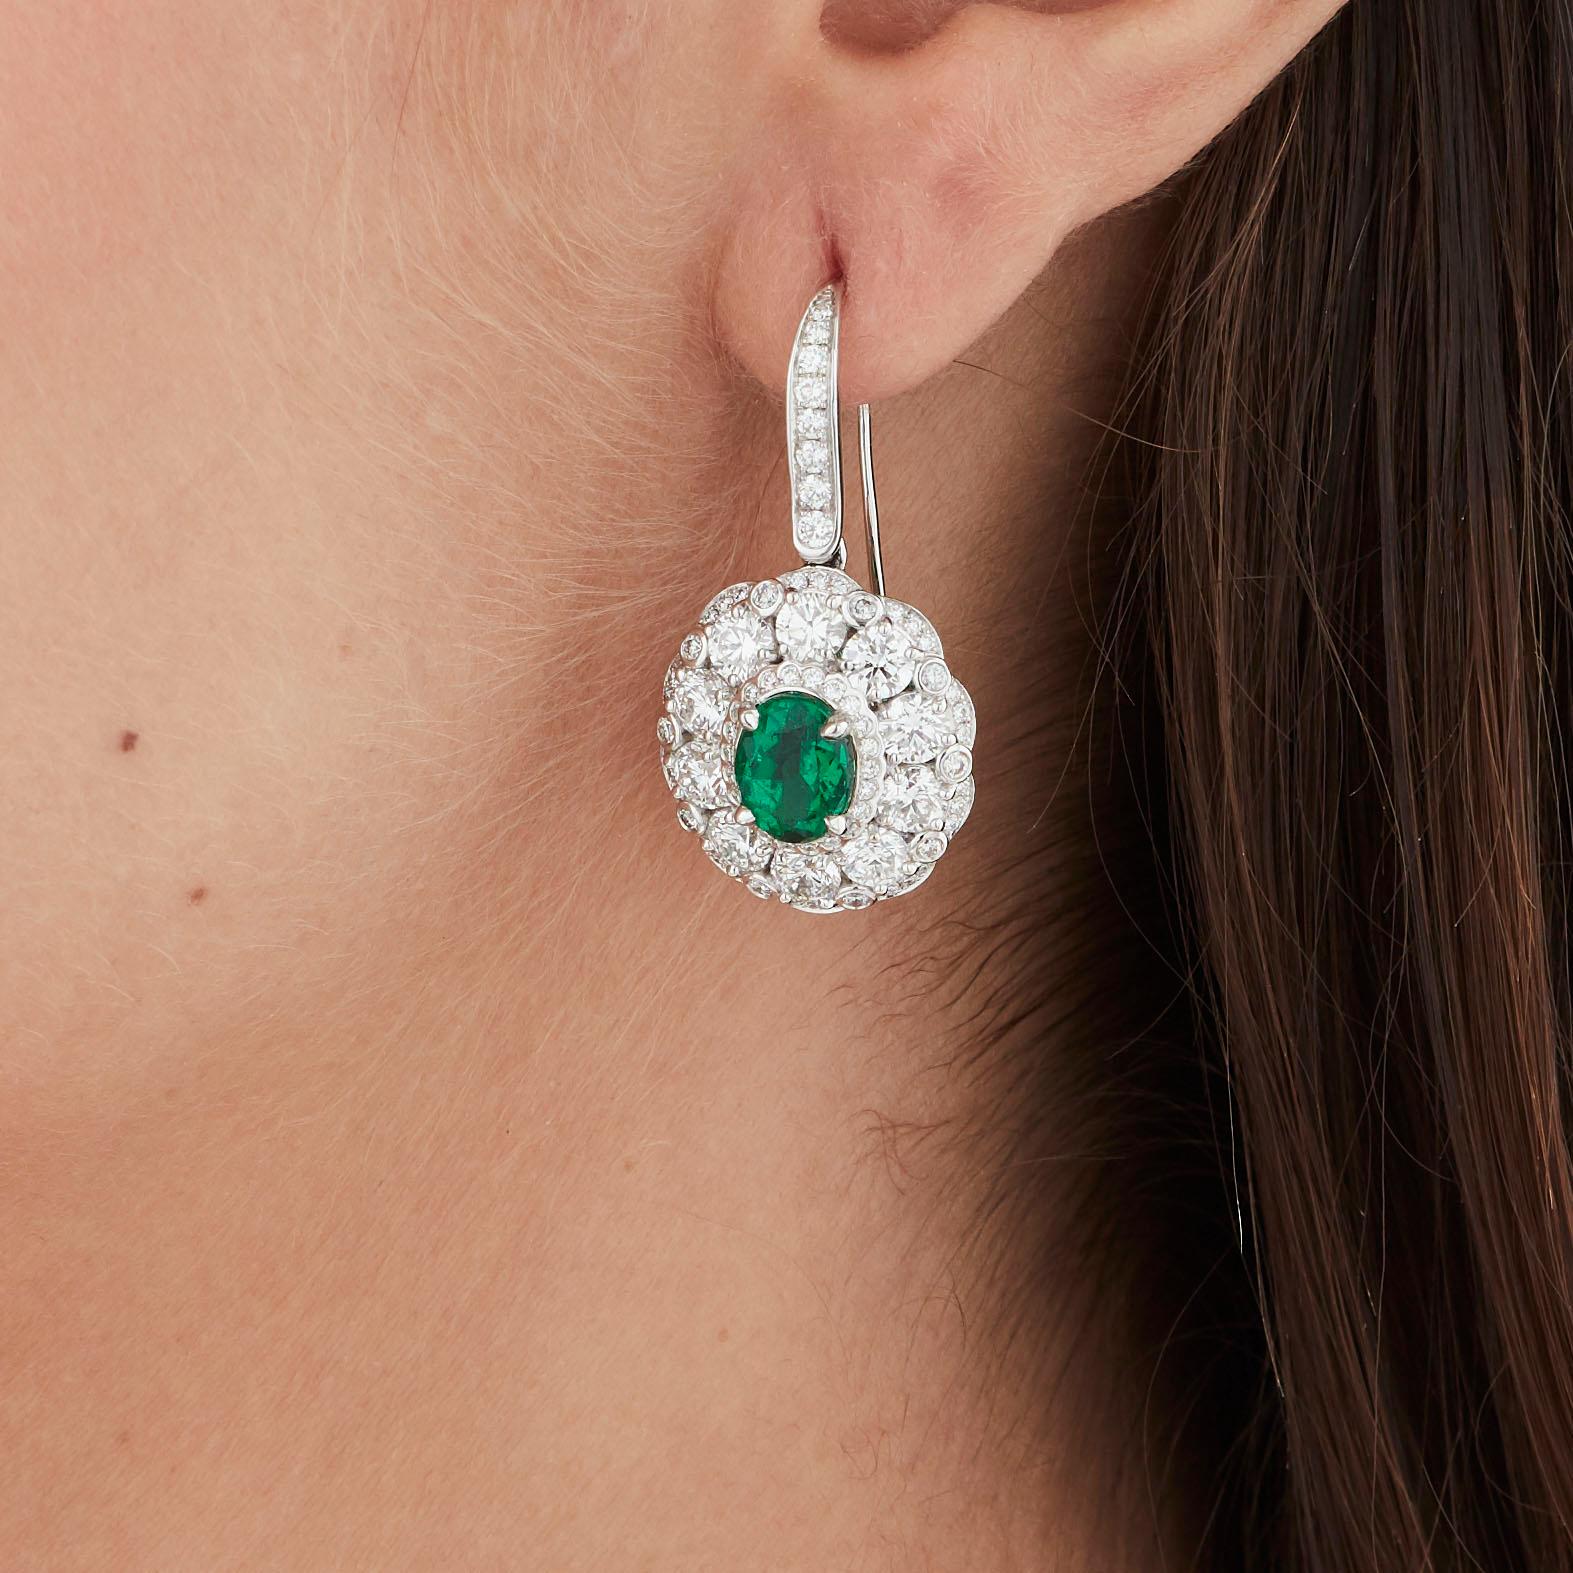 A House of Garrard 18 karat white gold 'Jewelled Vault' earrings with central oval emeralds set in a round white diamond surround and mount.

1 oval emerald weighing: 1.97cts 
1 oval emerald weighing: 1.88cts
Both Gubelin certified: Colombia, minor